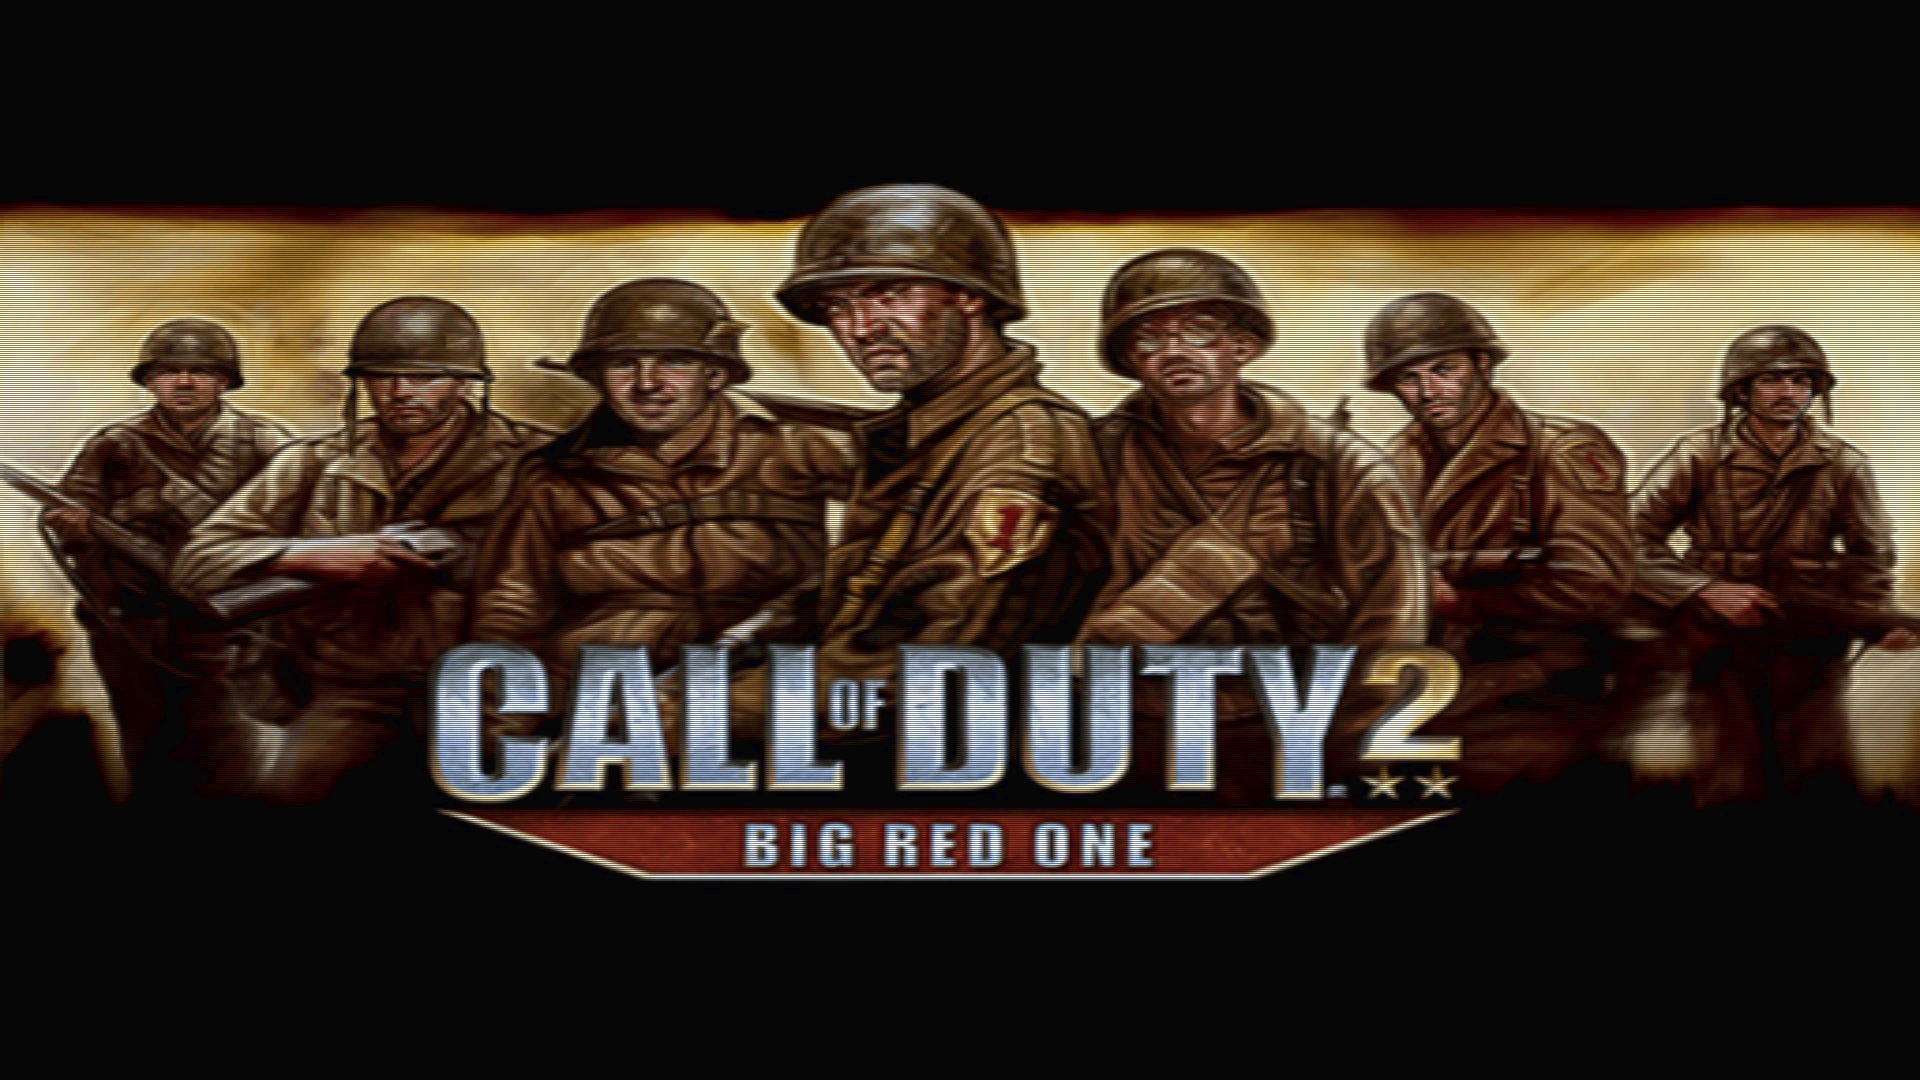 Call of Duty 2 Big Red One Transcript Games of History